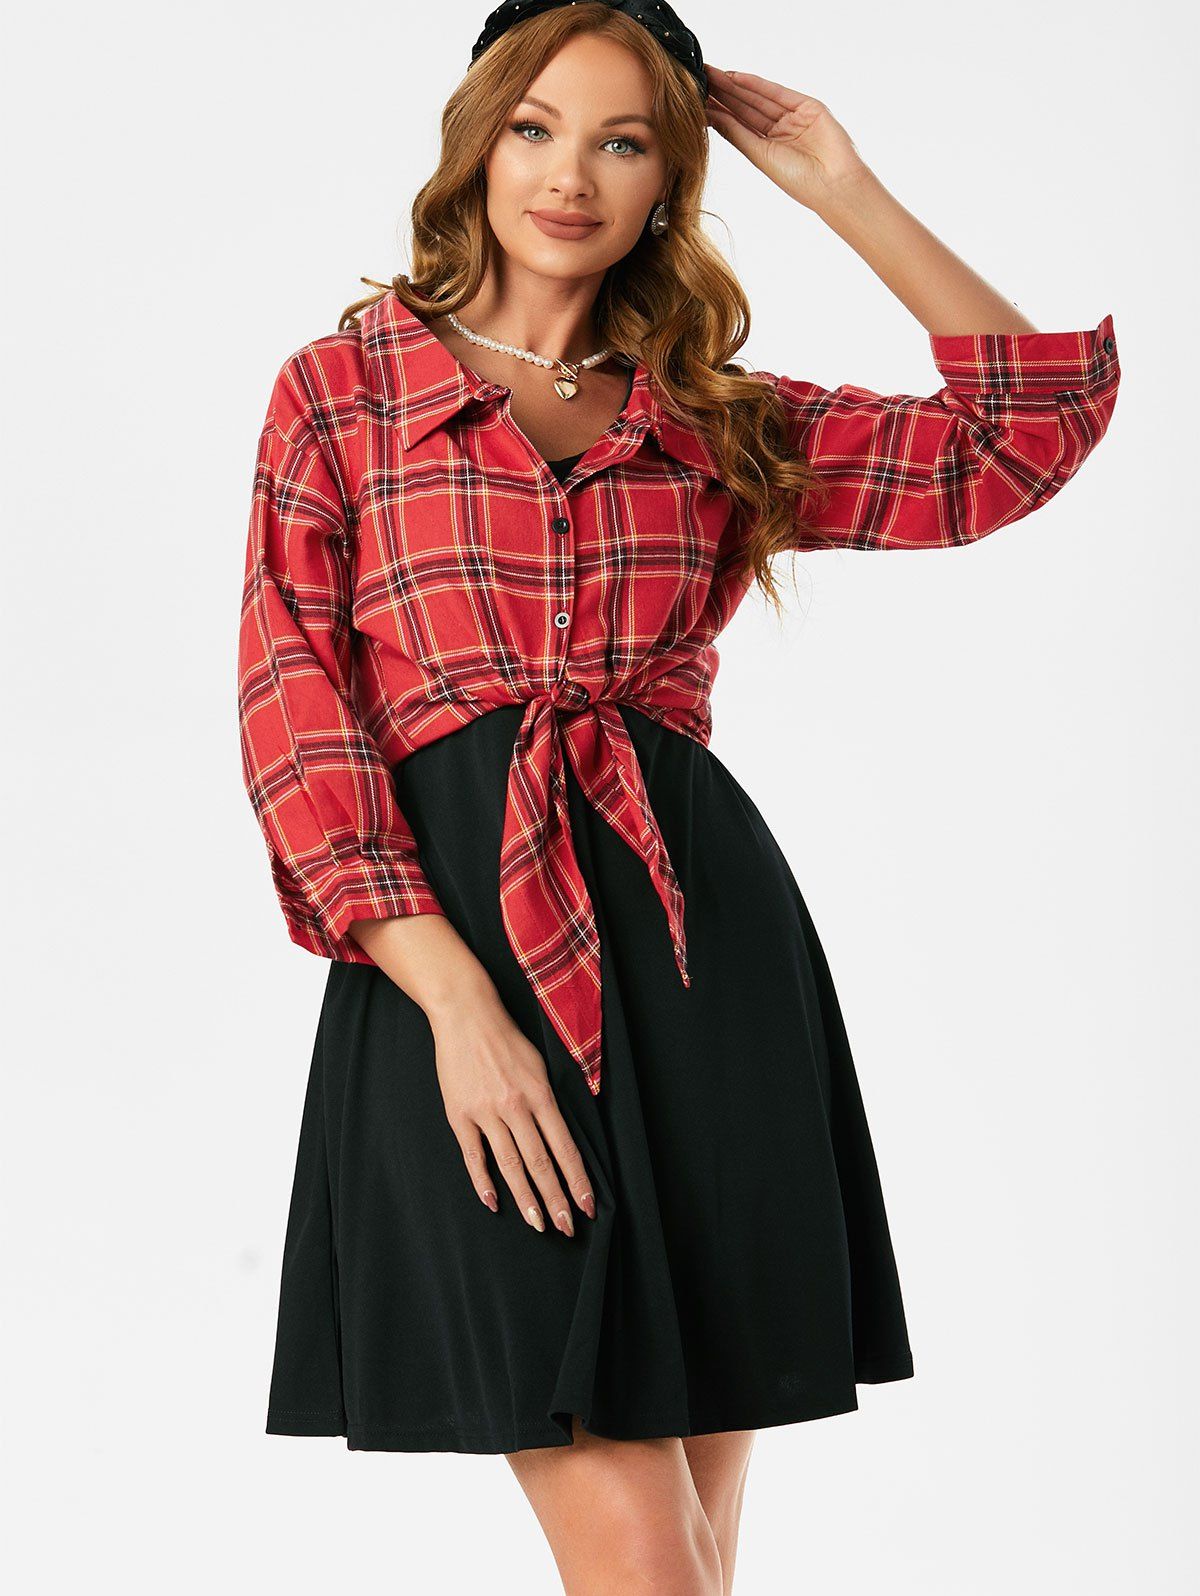 Front Tie Plaid Top And Sleeveless A Line Dress Set - multicolor A 2XL